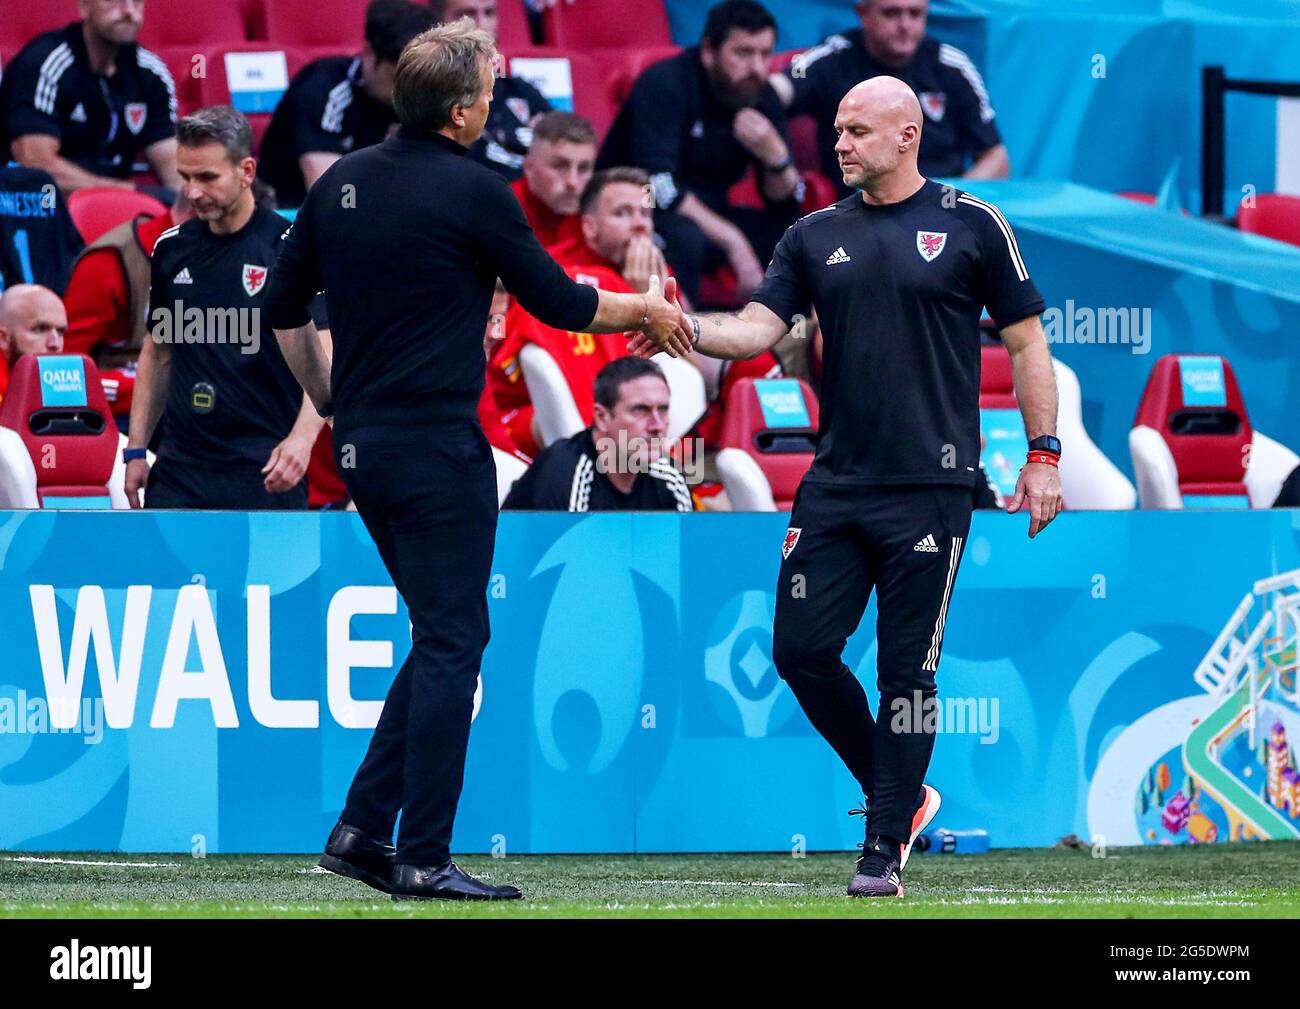 Wales caretaker manager Rob Pager (right) shakes hands with Denmark manager Kasper Hjulmand after the final whistle during the UEFA Euro 2020 round of 16 match held at the Johan Cruijff ArenA in Amsterdam, Netherlands. Picture date: Saturday June 26, 2021. Stock Photo